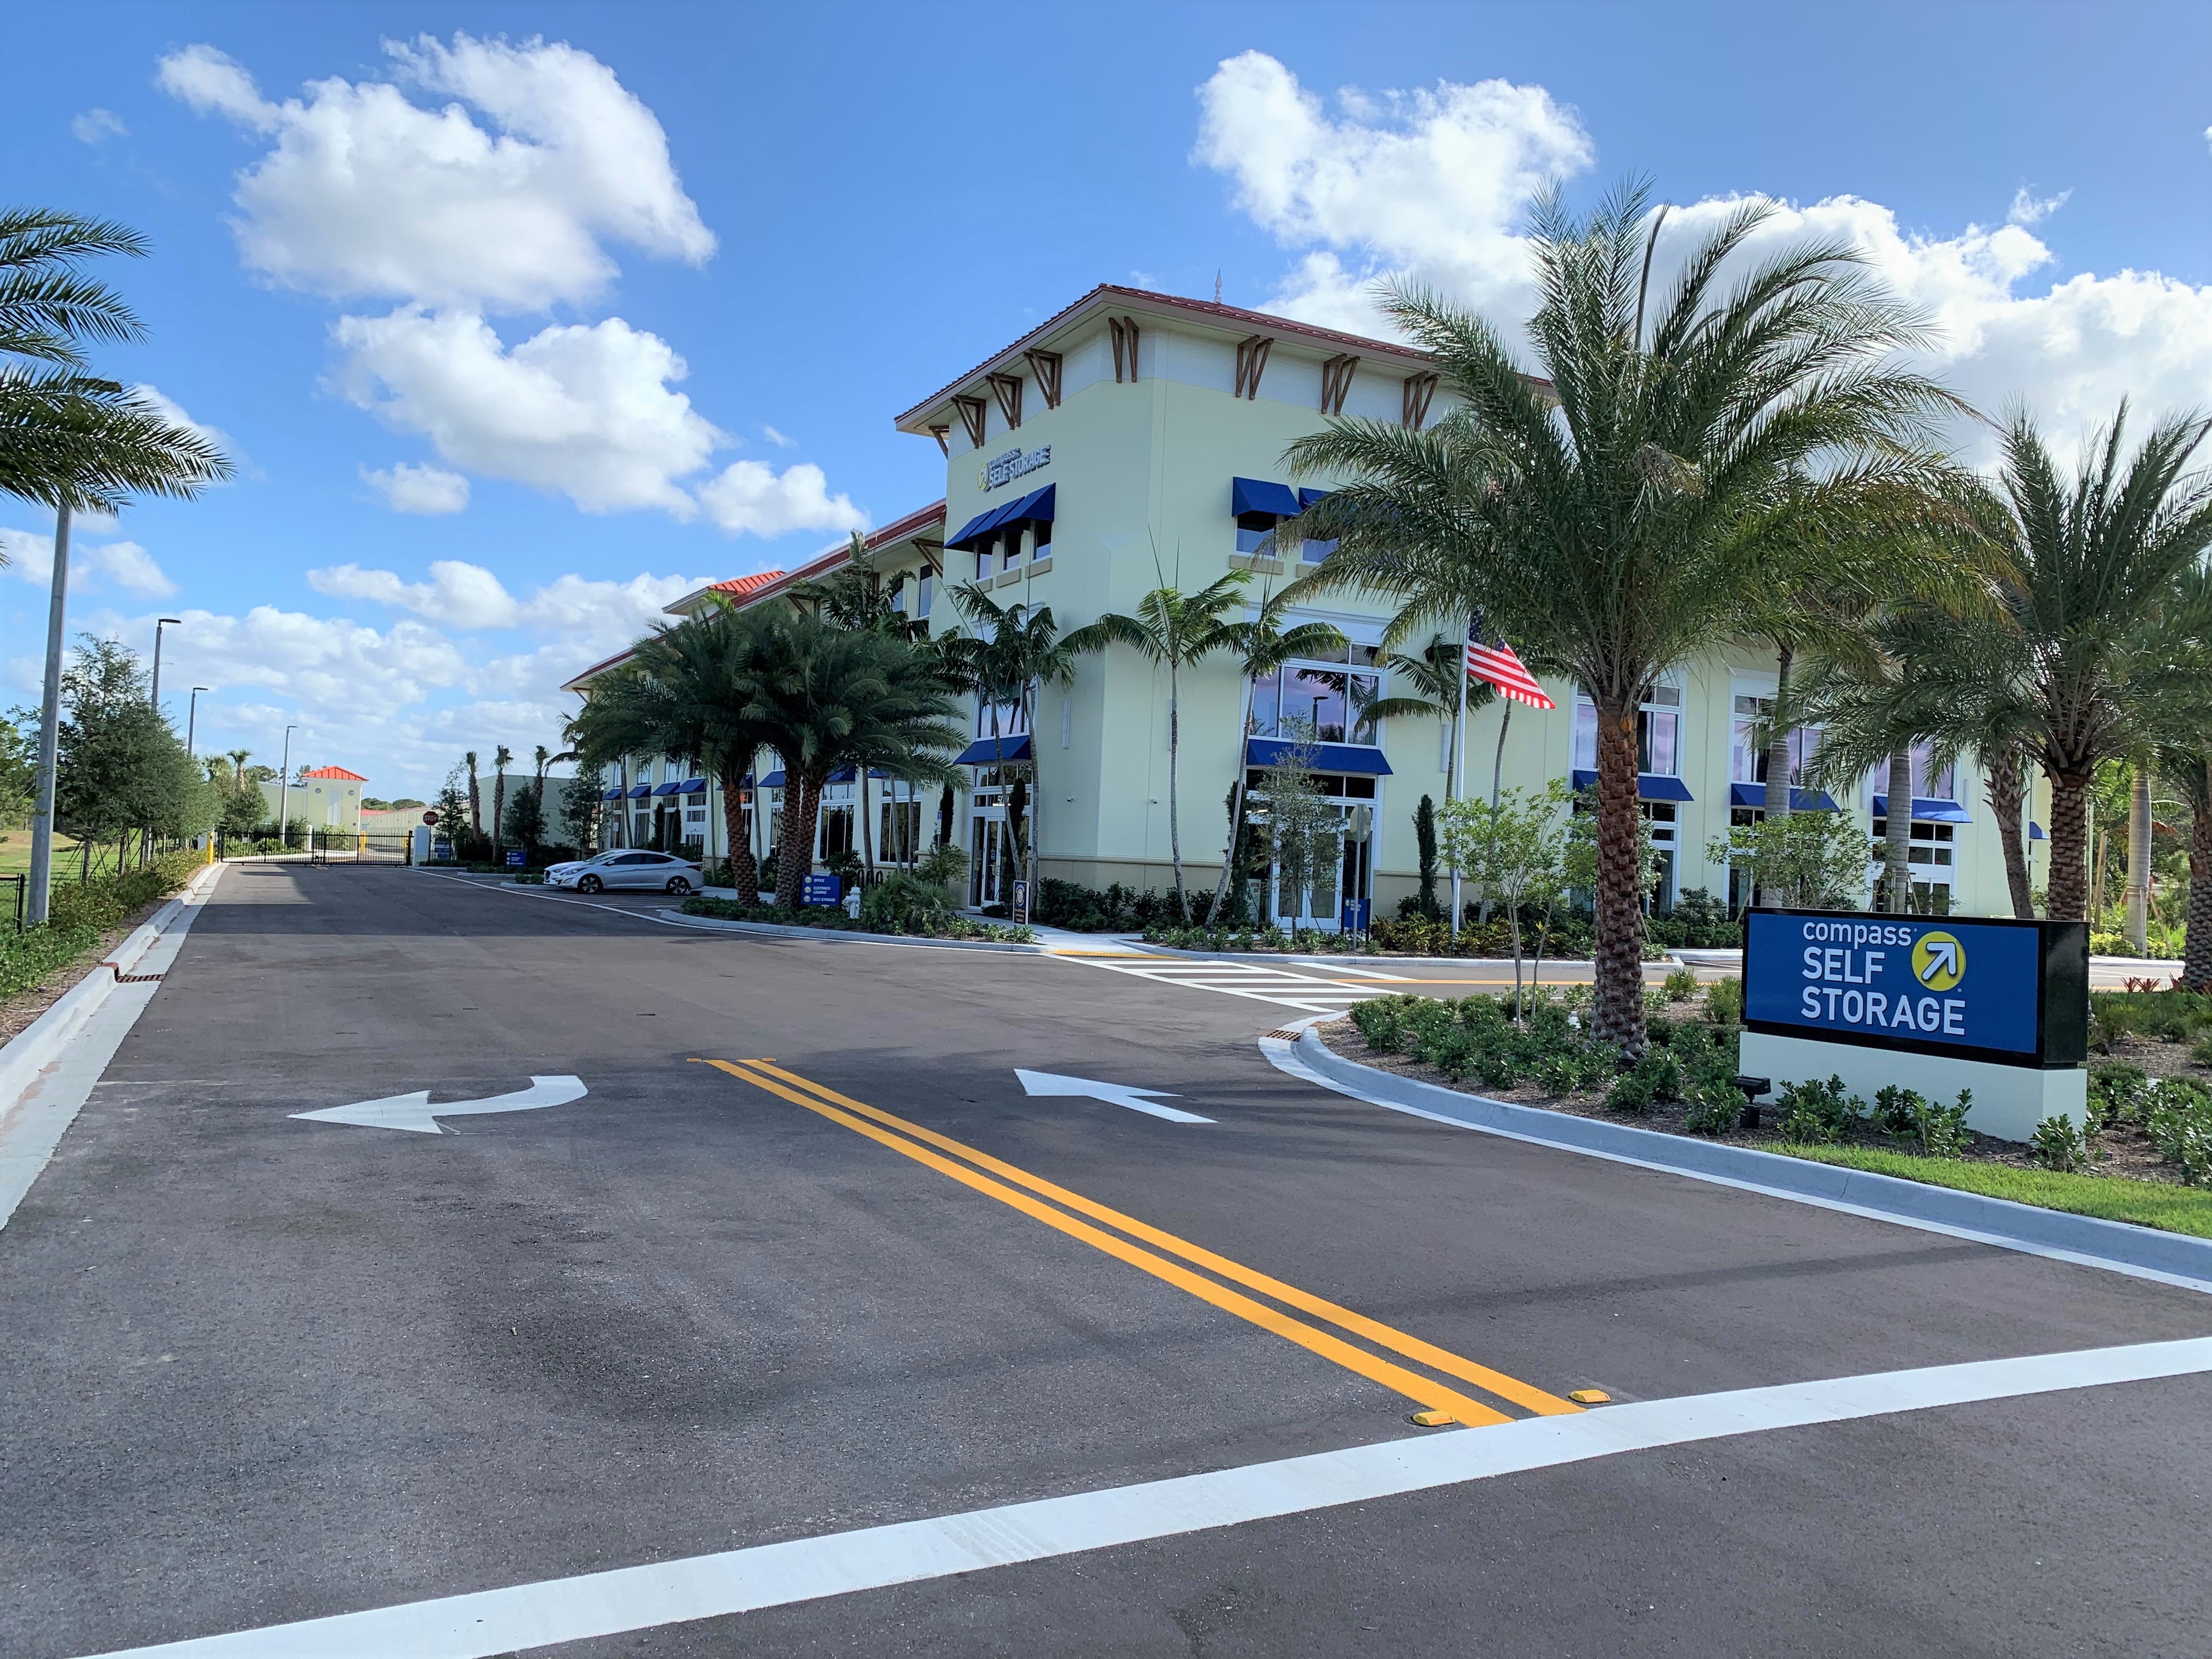 Compass Self Storage has completed construction on their newest flagship self storage center, located in Jupiter, Florida. 